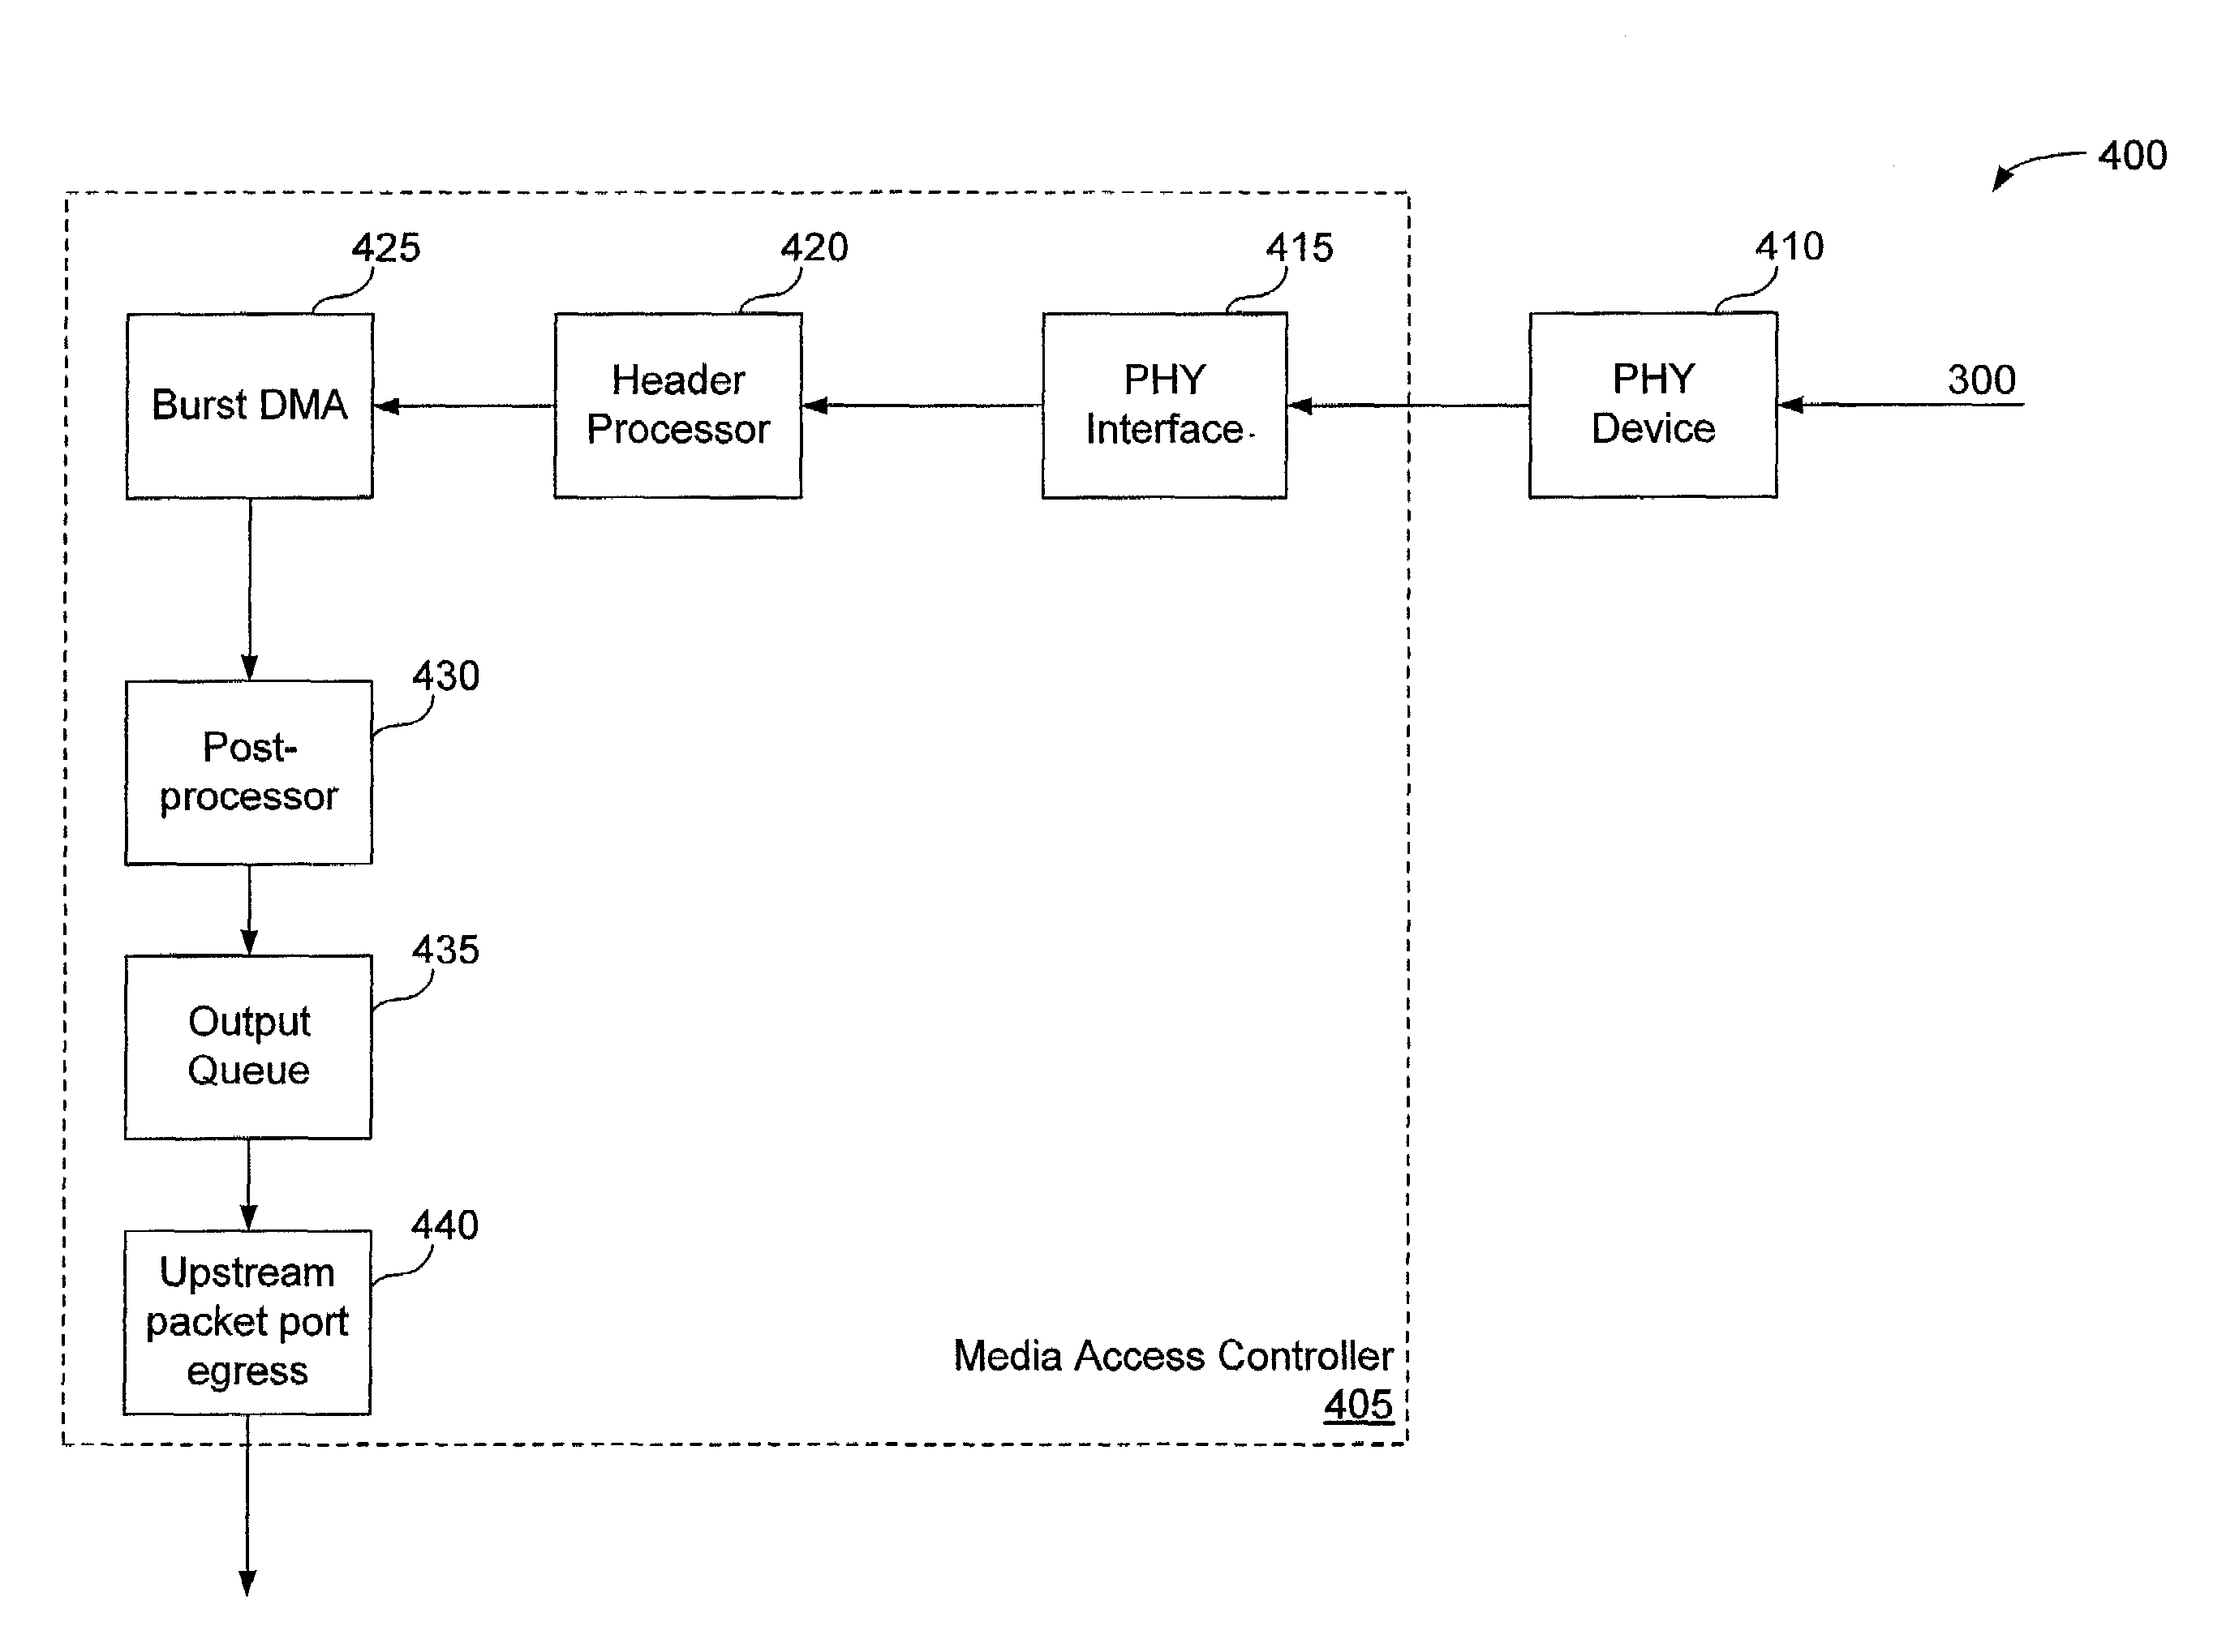 Packet tag for support of remote network function/packet classification